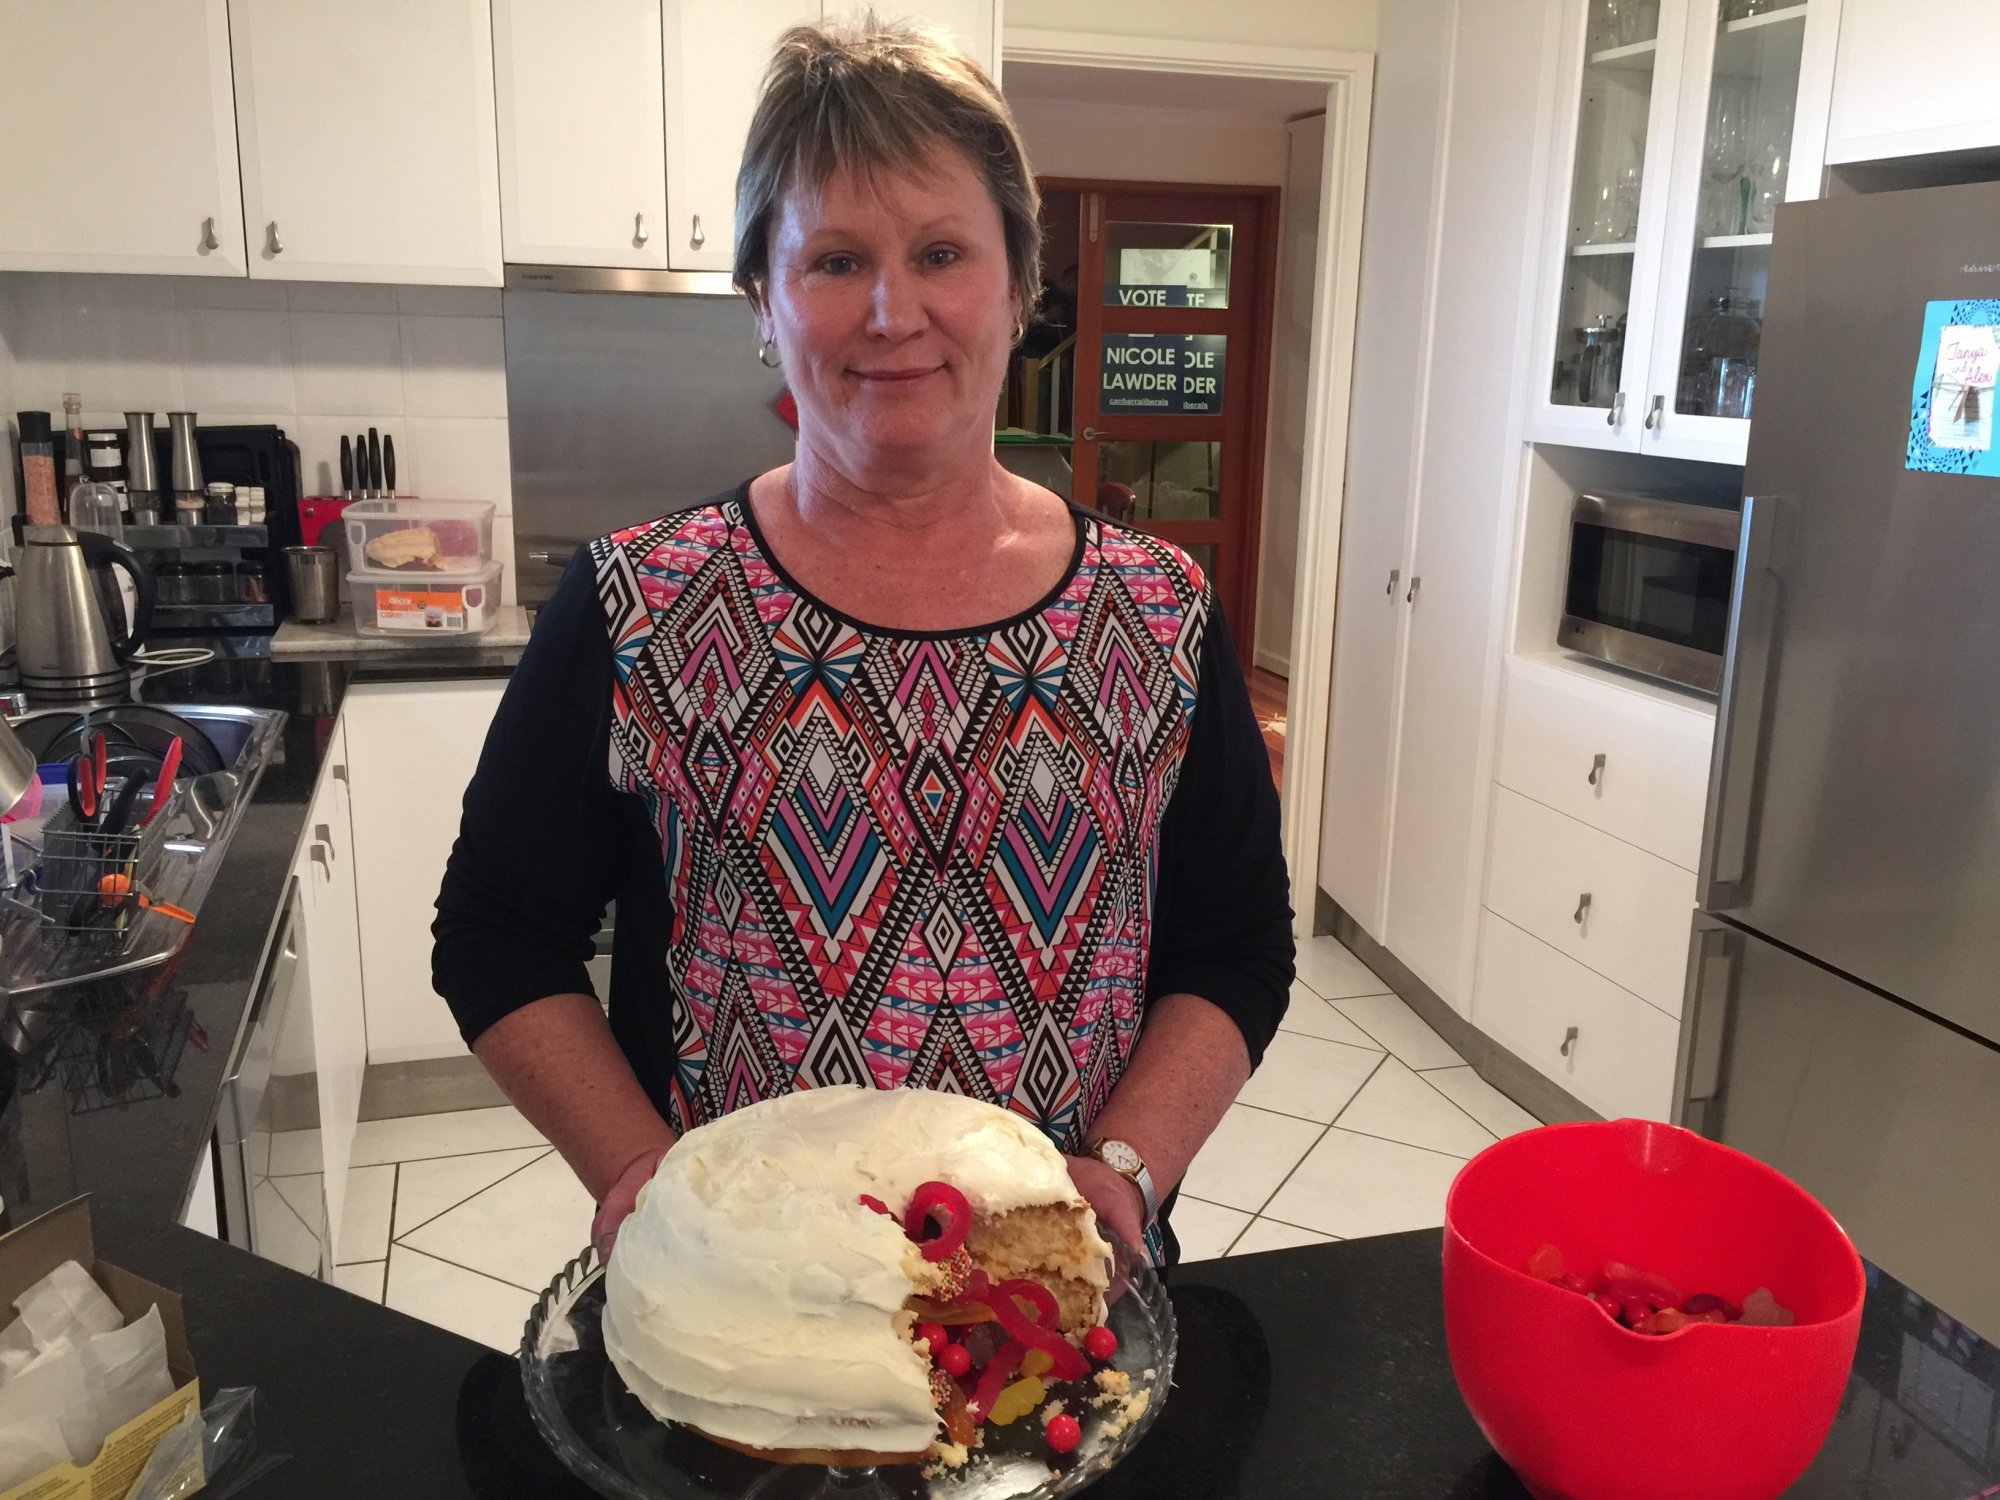 ACT election candidate bake-off: Nicole Lawder